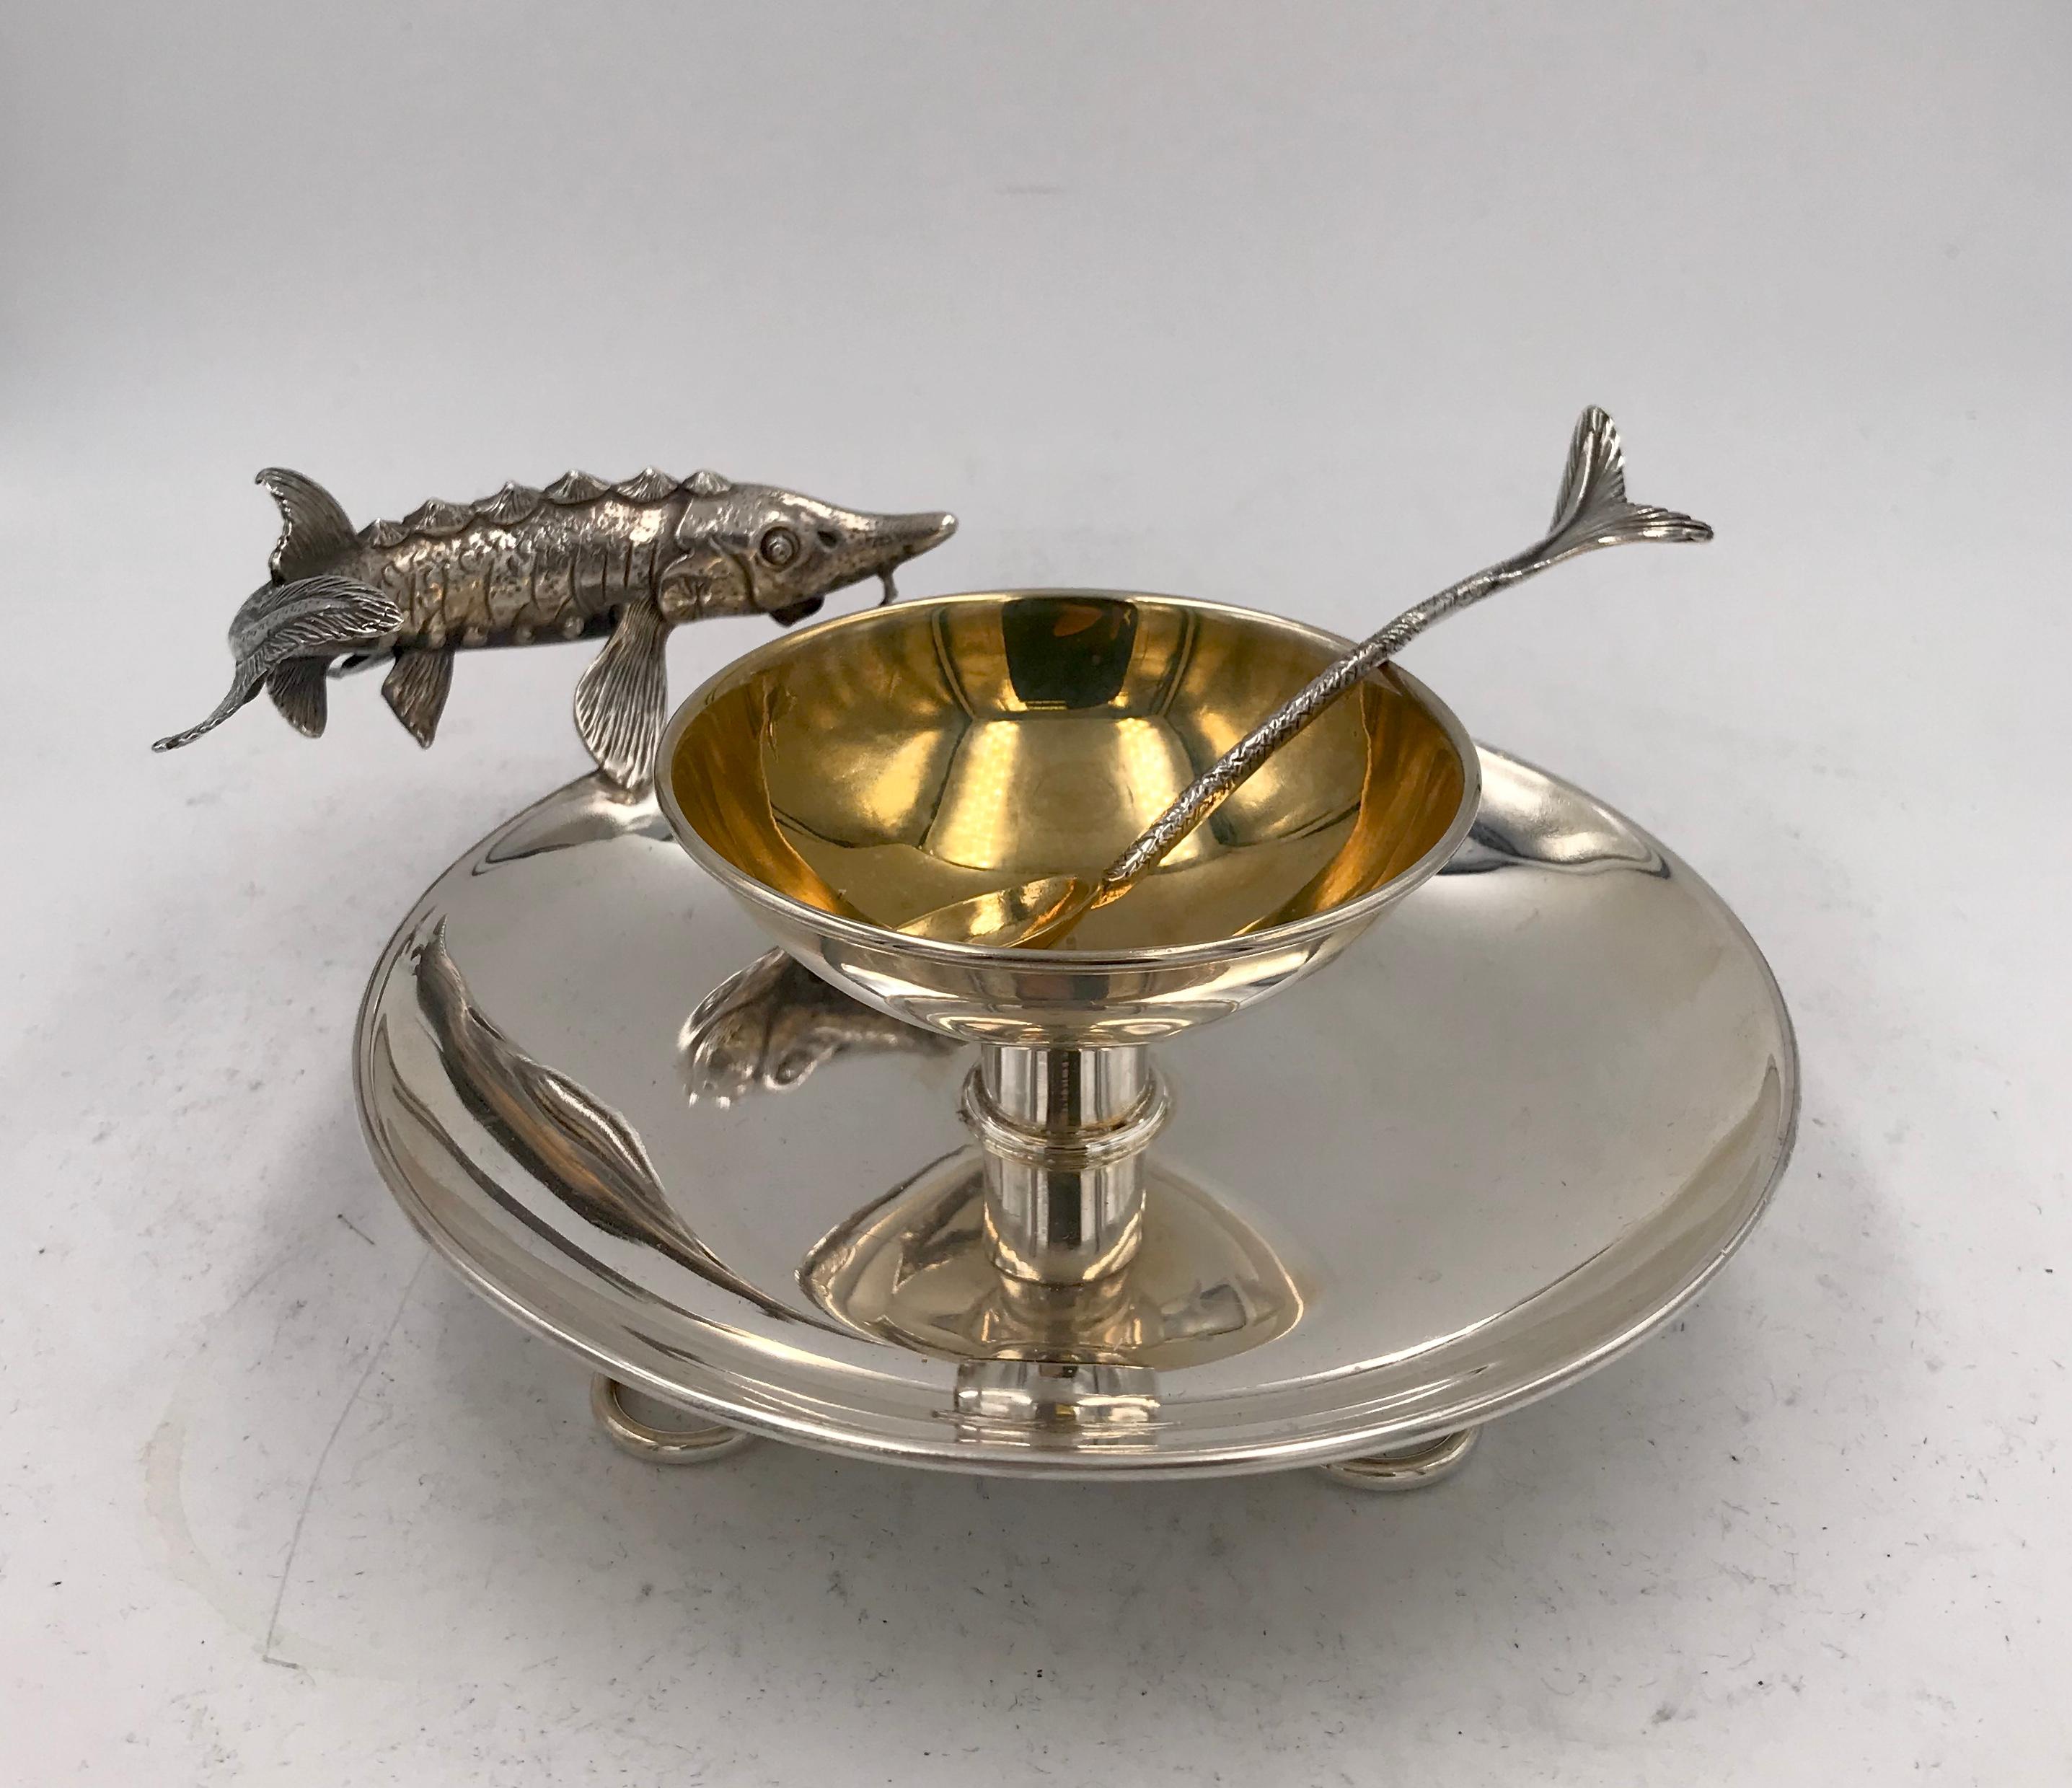 Sterling silver caviar dish and spoon, the bowl with gilded interior.
This lovely little dish has a sturgeon as the handle, and the accompanying spoon has a fish tail handle.